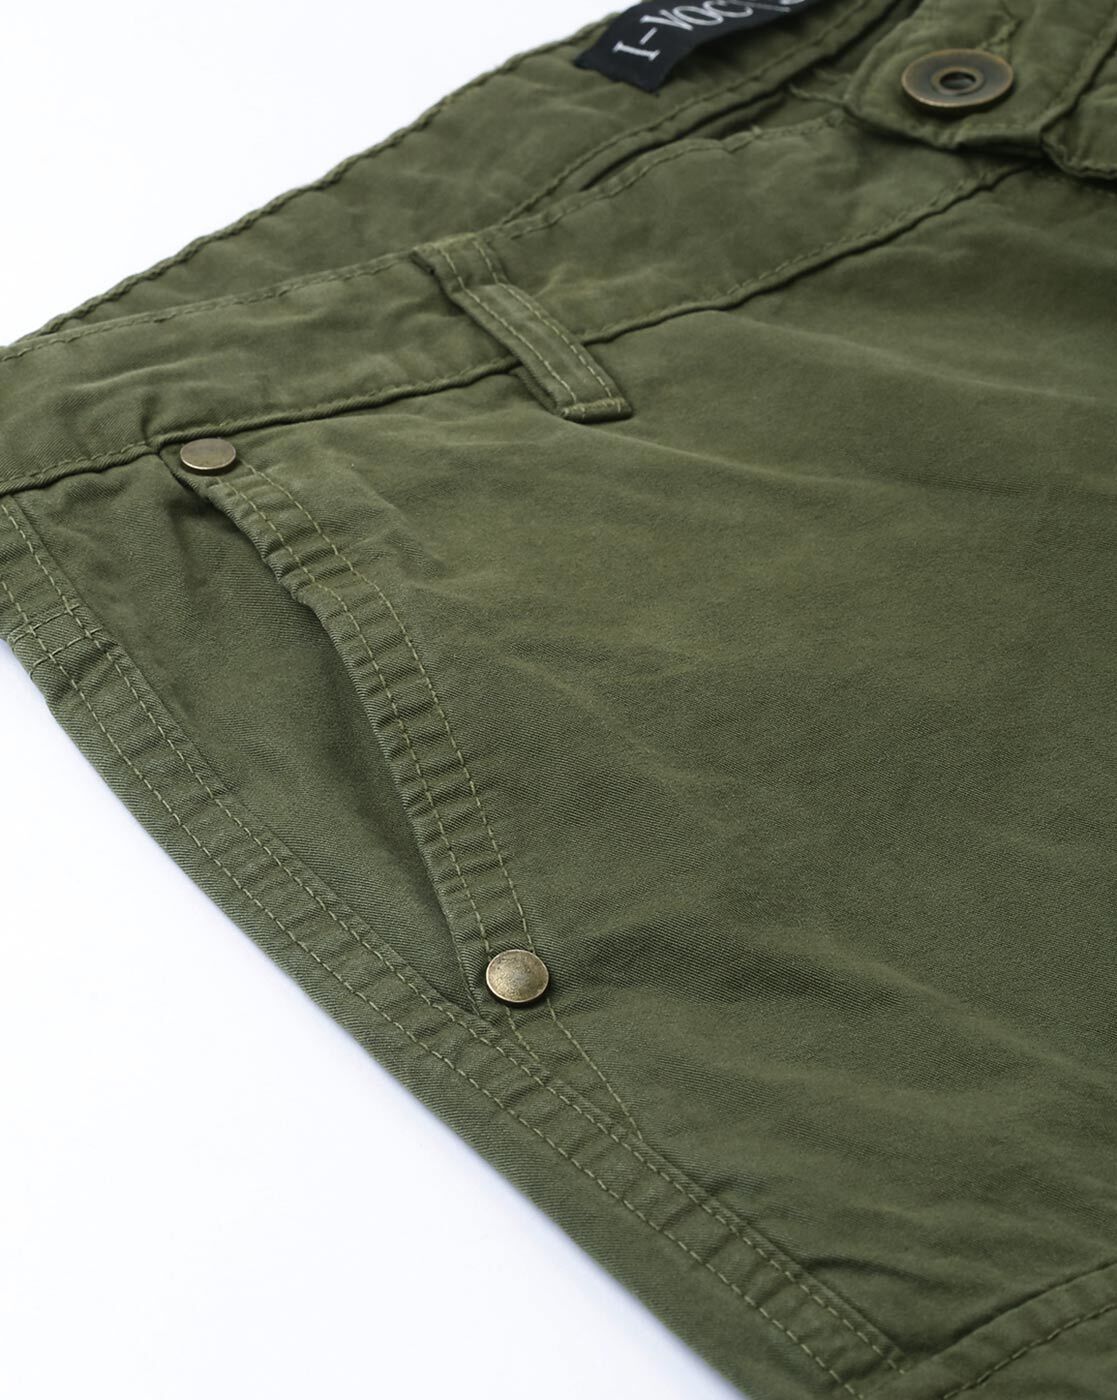 AUSTRIAN ARMY SURPLUS ISSUE RIPSTOP OLIVE GREEN COMBAT CARGO TROUSERSFATIGUES   Sierra Alpha Supplies